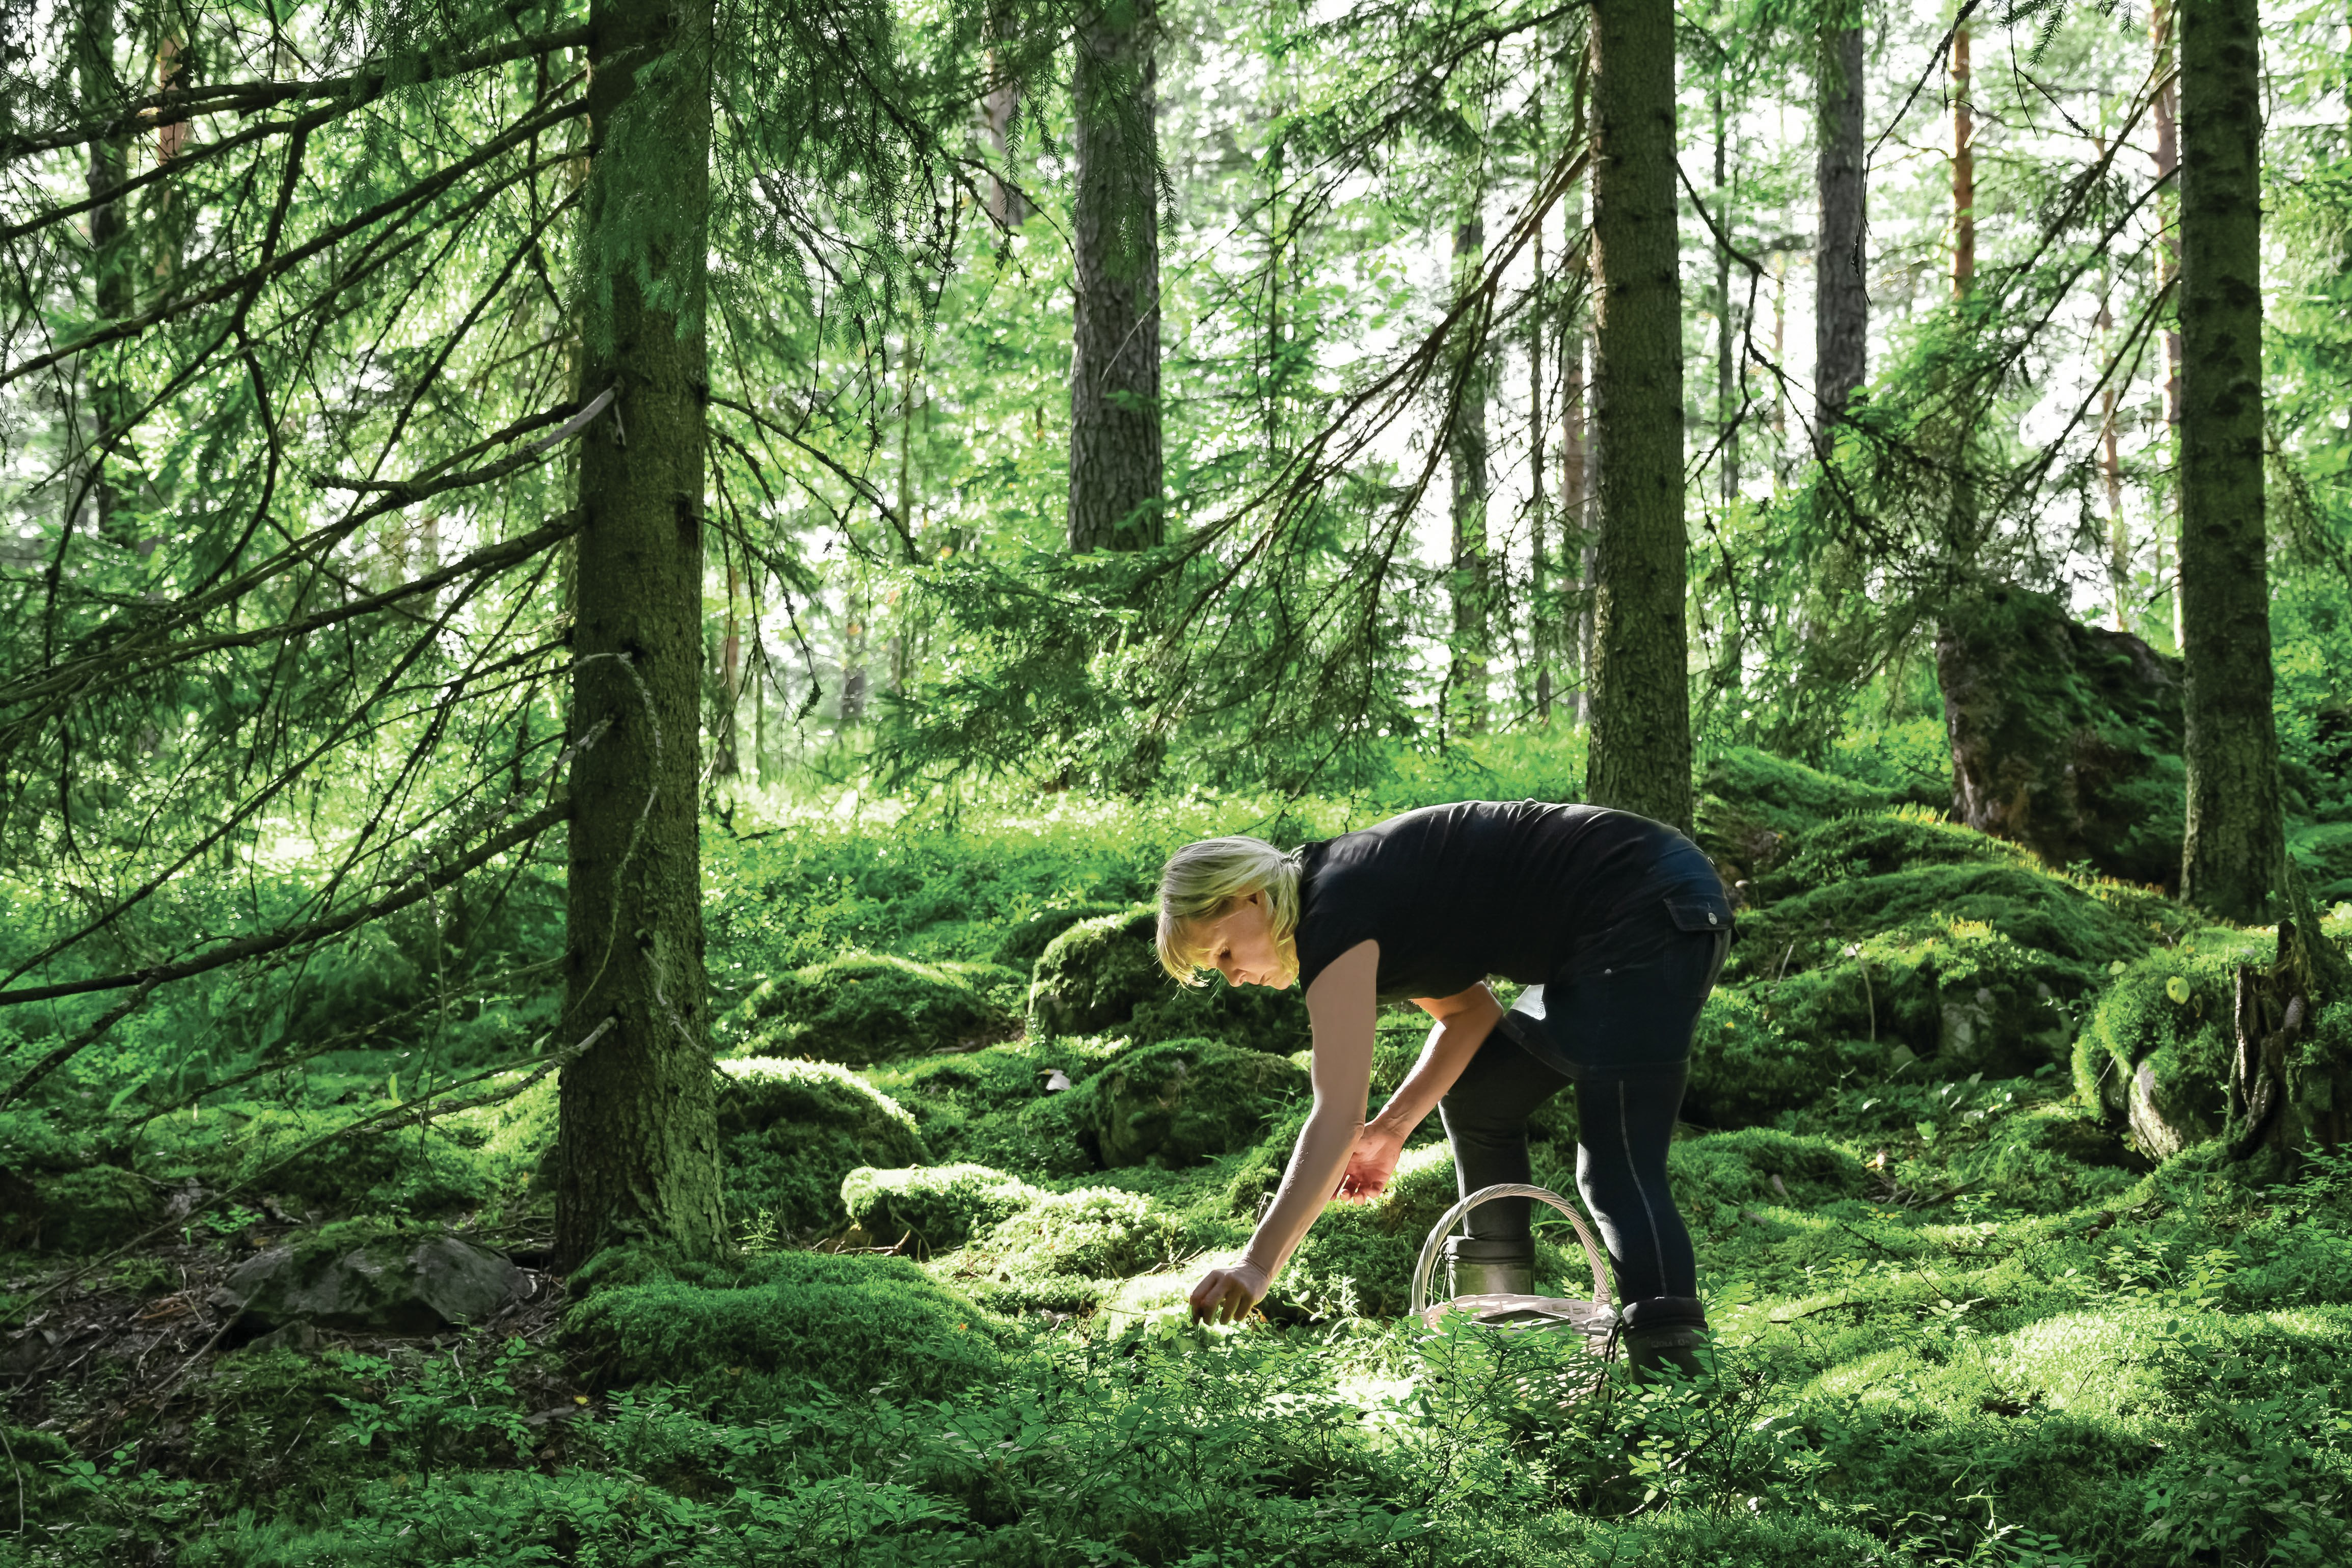 Photo of a woman bending down and reaching out to the forest floor in Kuopio, Finland. There is a wicker basket by her feet to collect what she forages. The evergreen forest is dense with greenery but sunlight manages to dapple the mossy ground.